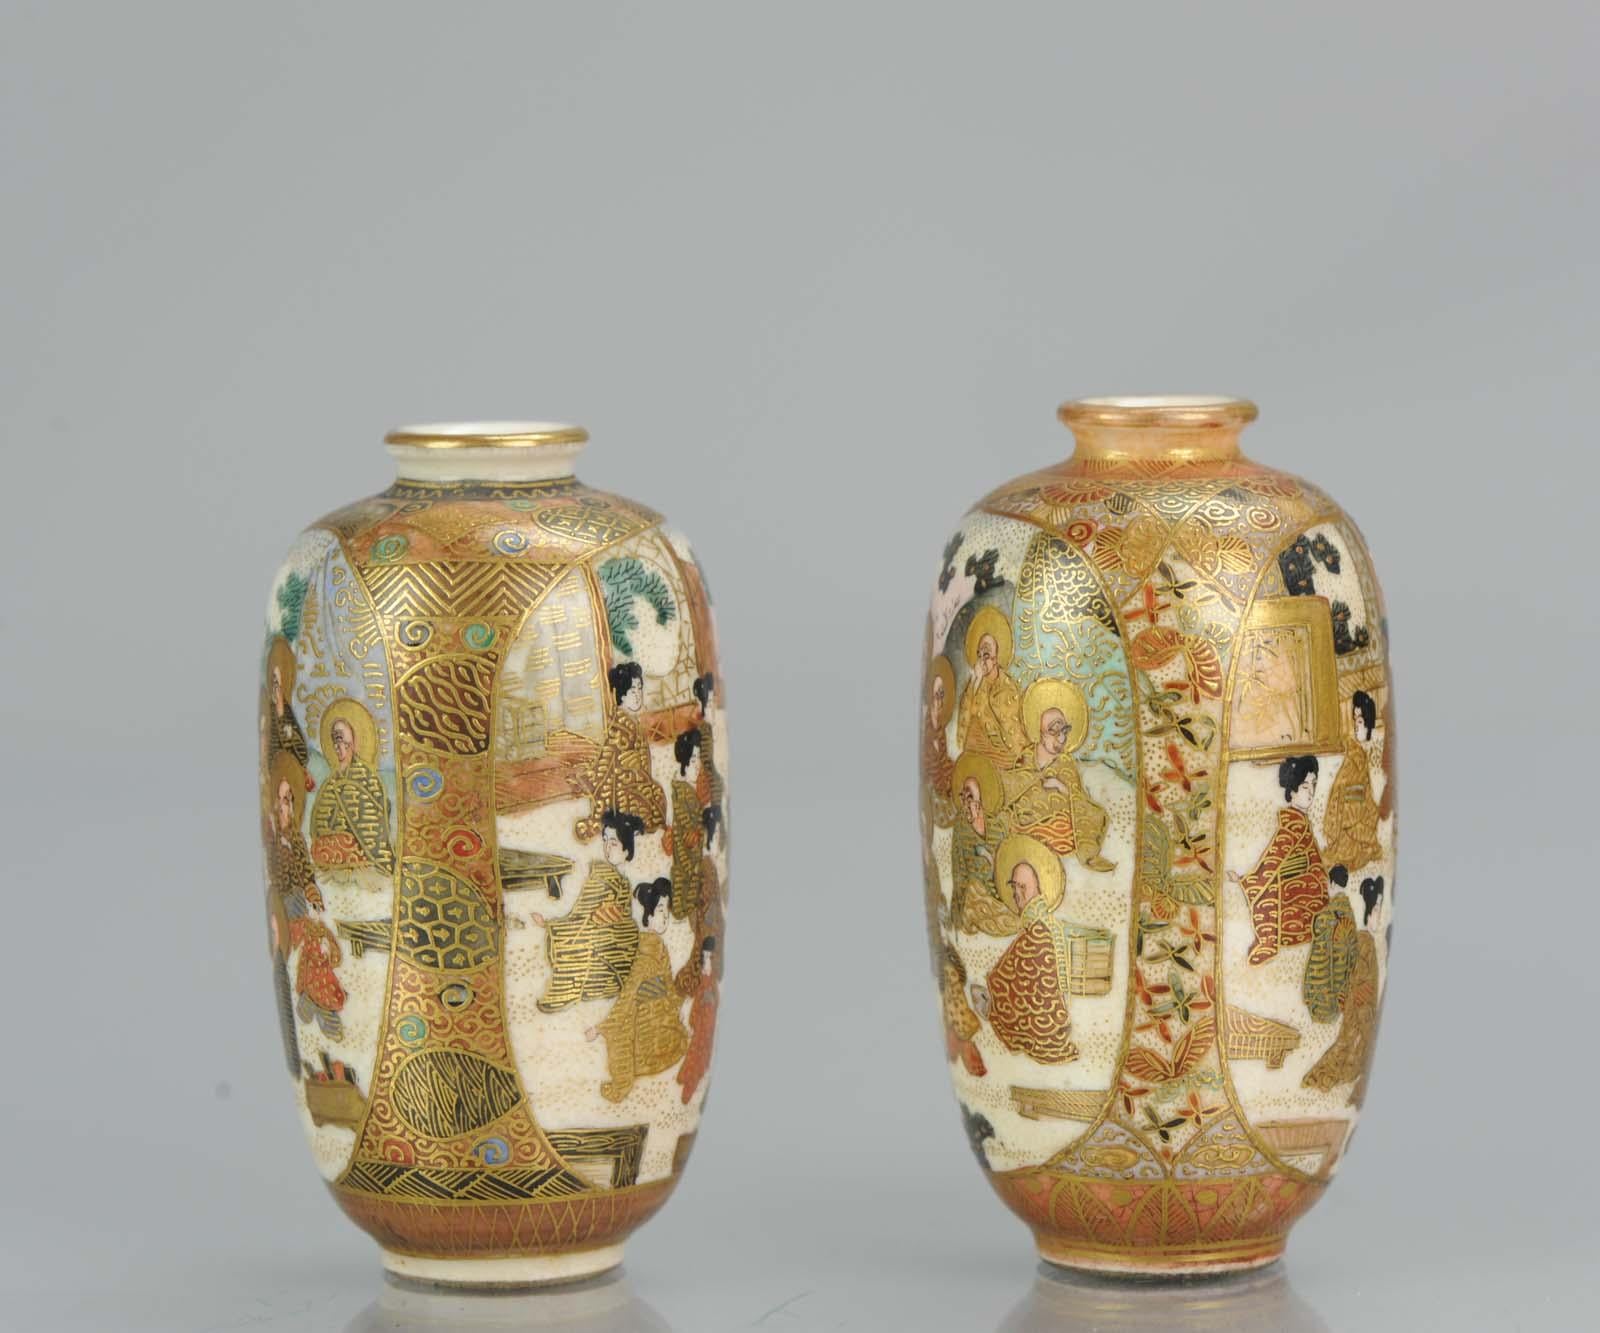 Antique 19th Century Satsuma Pair of Mini Vases Japan Figures Meiji Period In Excellent Condition For Sale In Amsterdam, Noord Holland